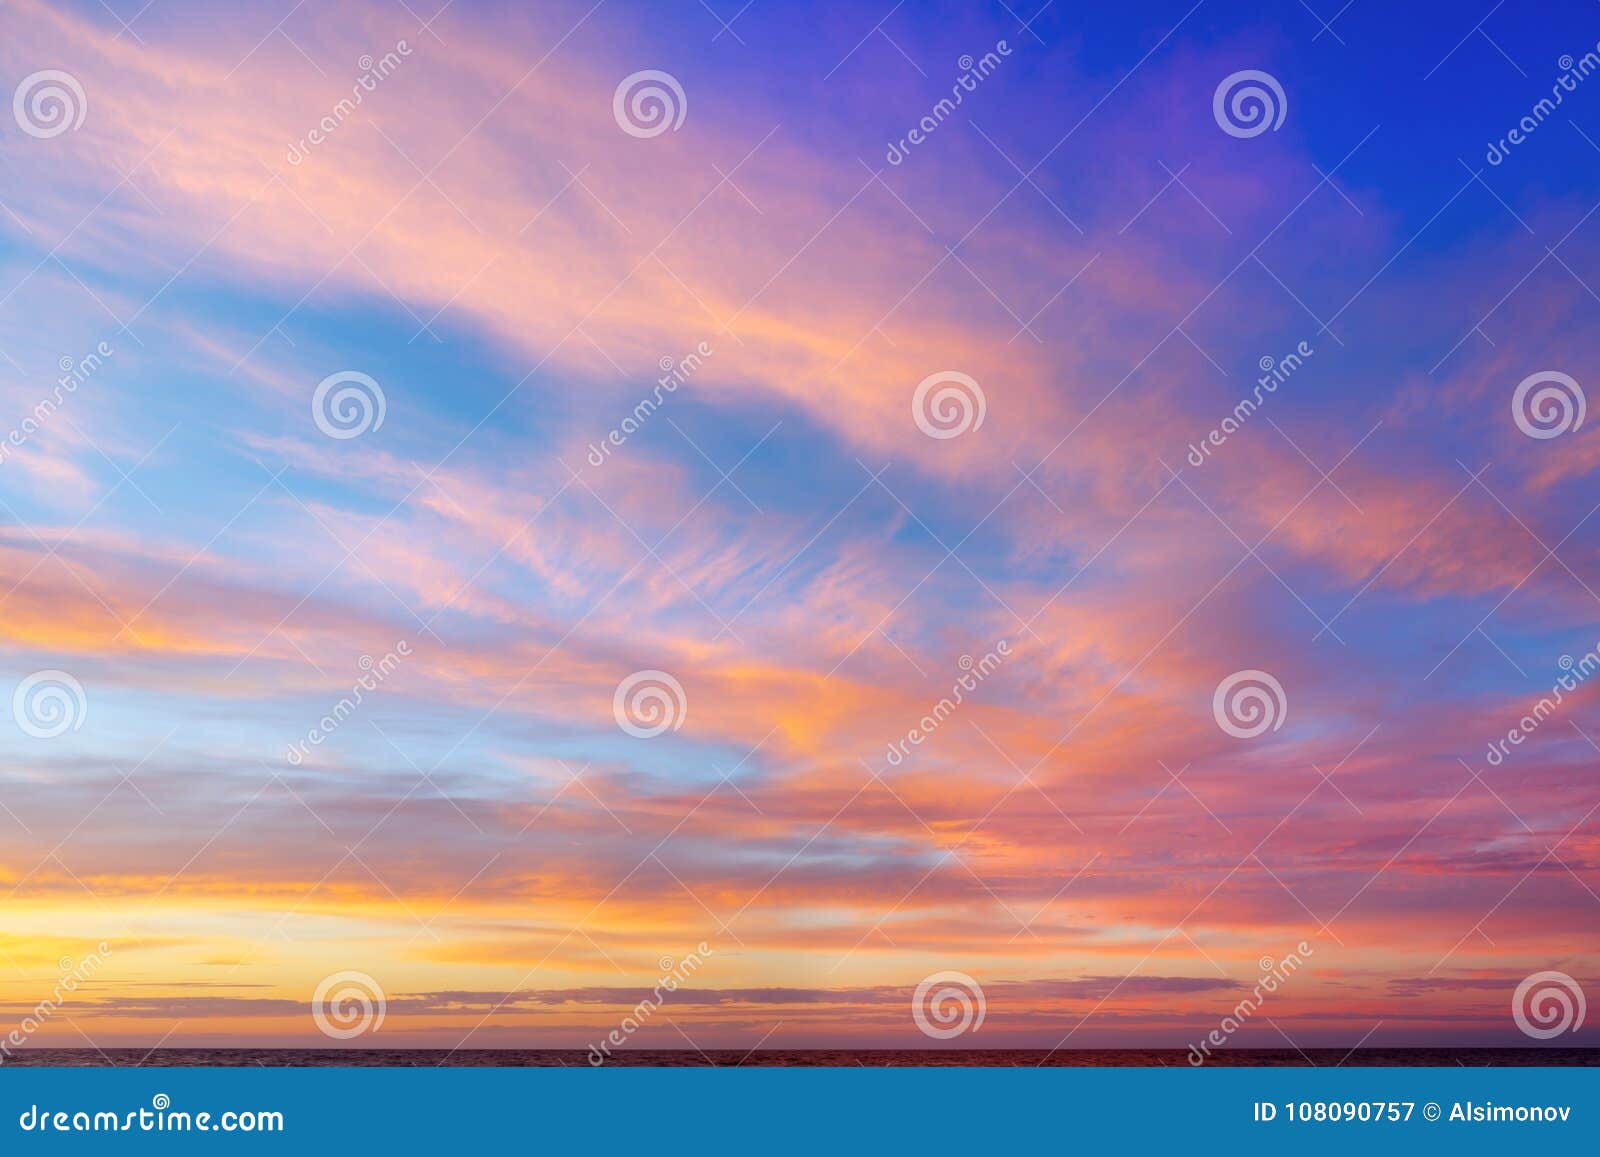 beautiful evening sky with pink clouds. sunset over the sea